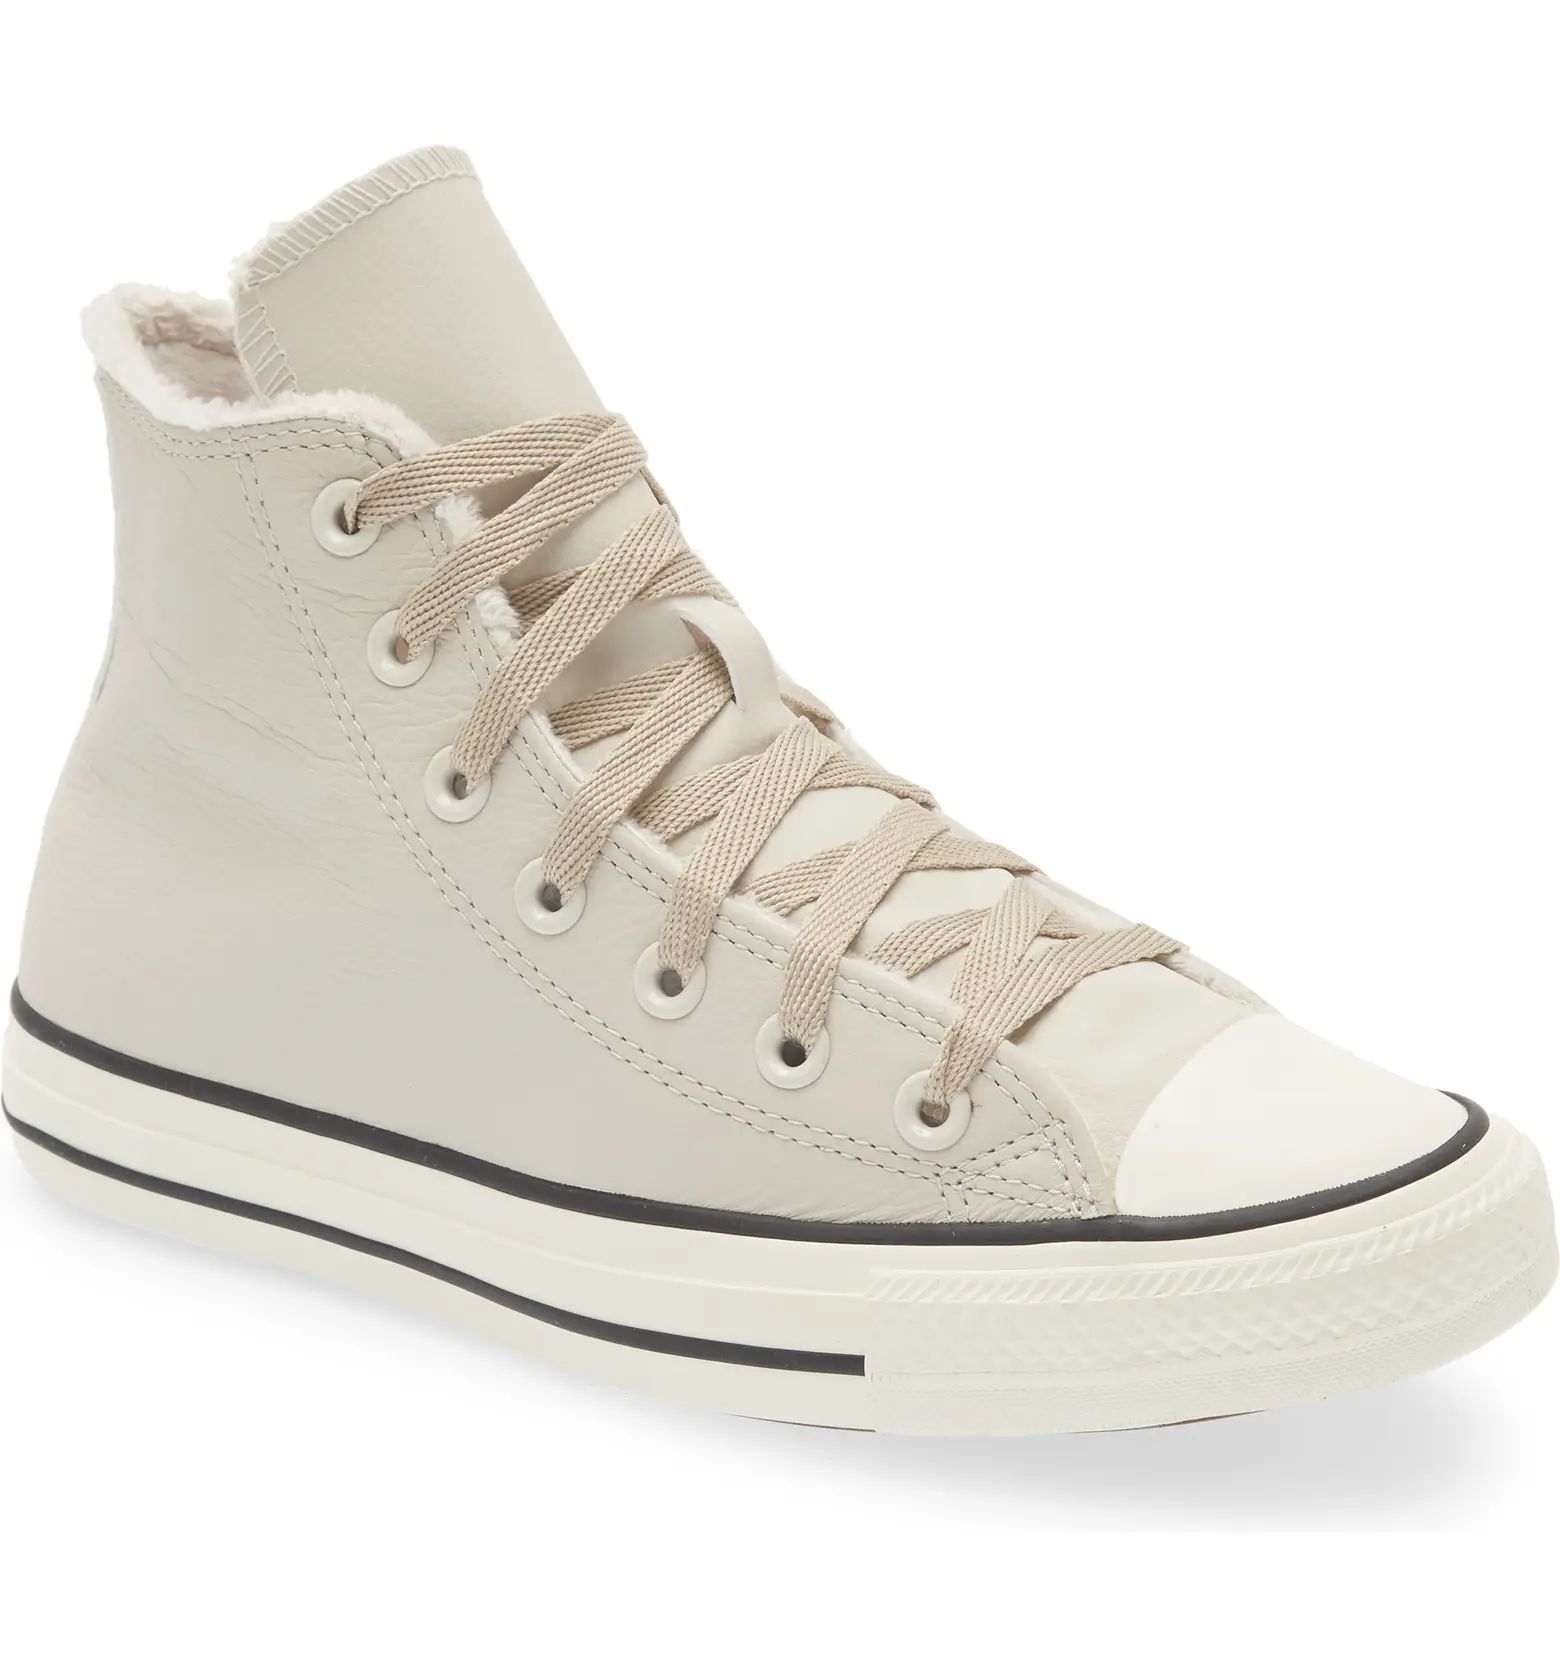 Chuck Taylor All Star High Top Sneaker | Nordstrom